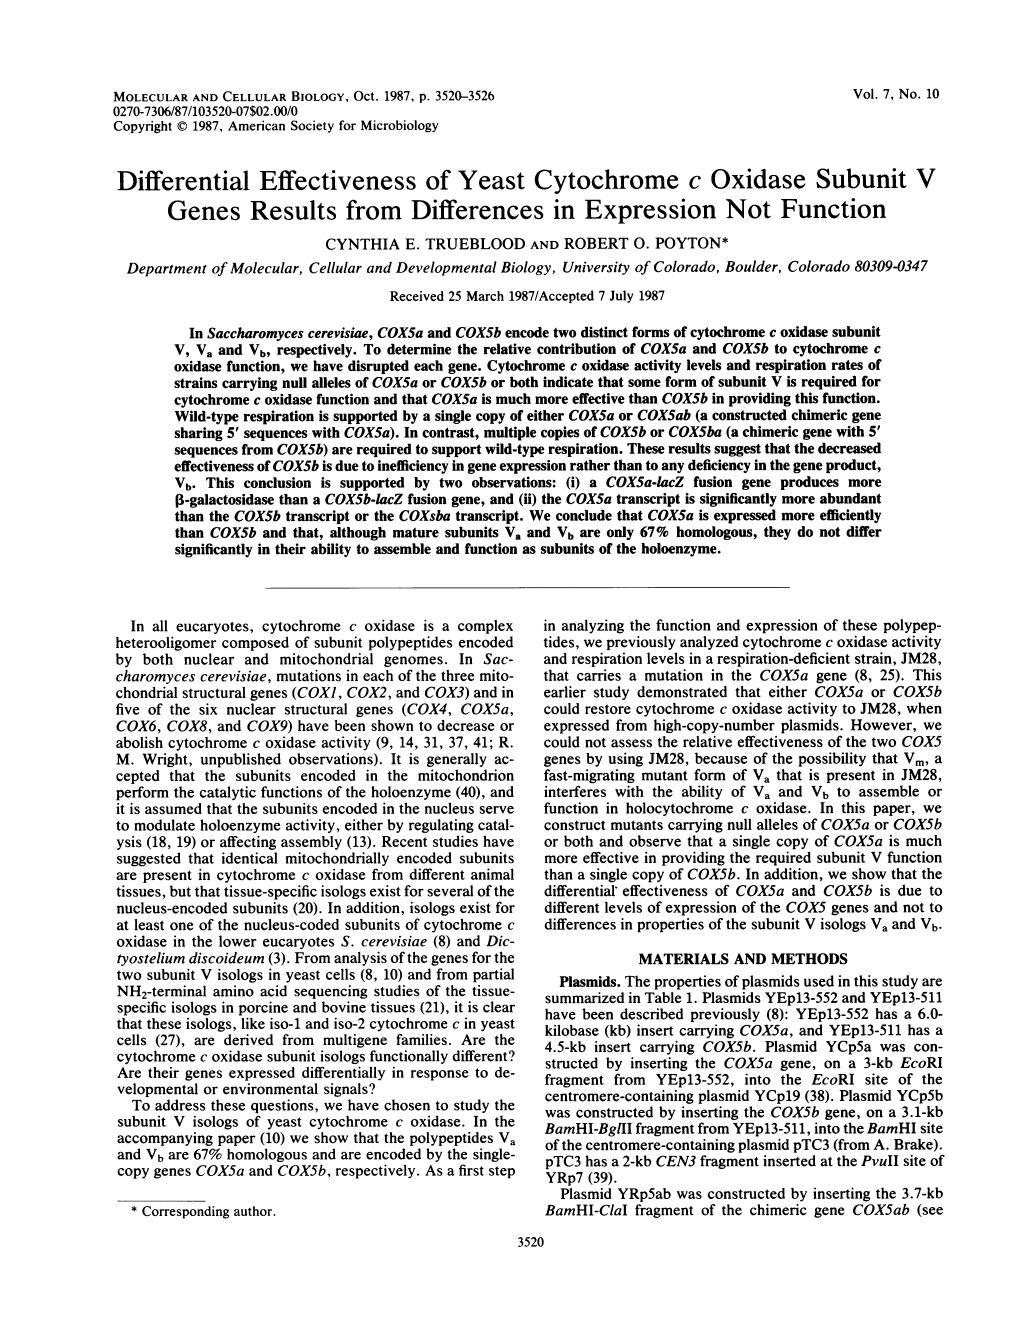 Differential Effectiveness of Yeast Cytochrome C Oxidase Subunit Genes Results from Differences in Expression Not Function